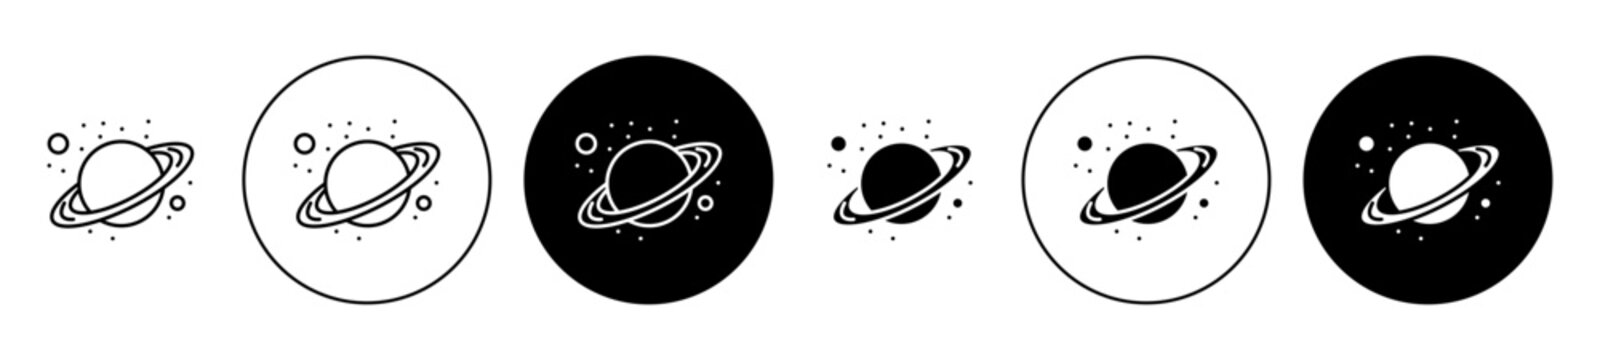 Saturn planet vector icon set. space jupiter planet with ring symbol in black color.